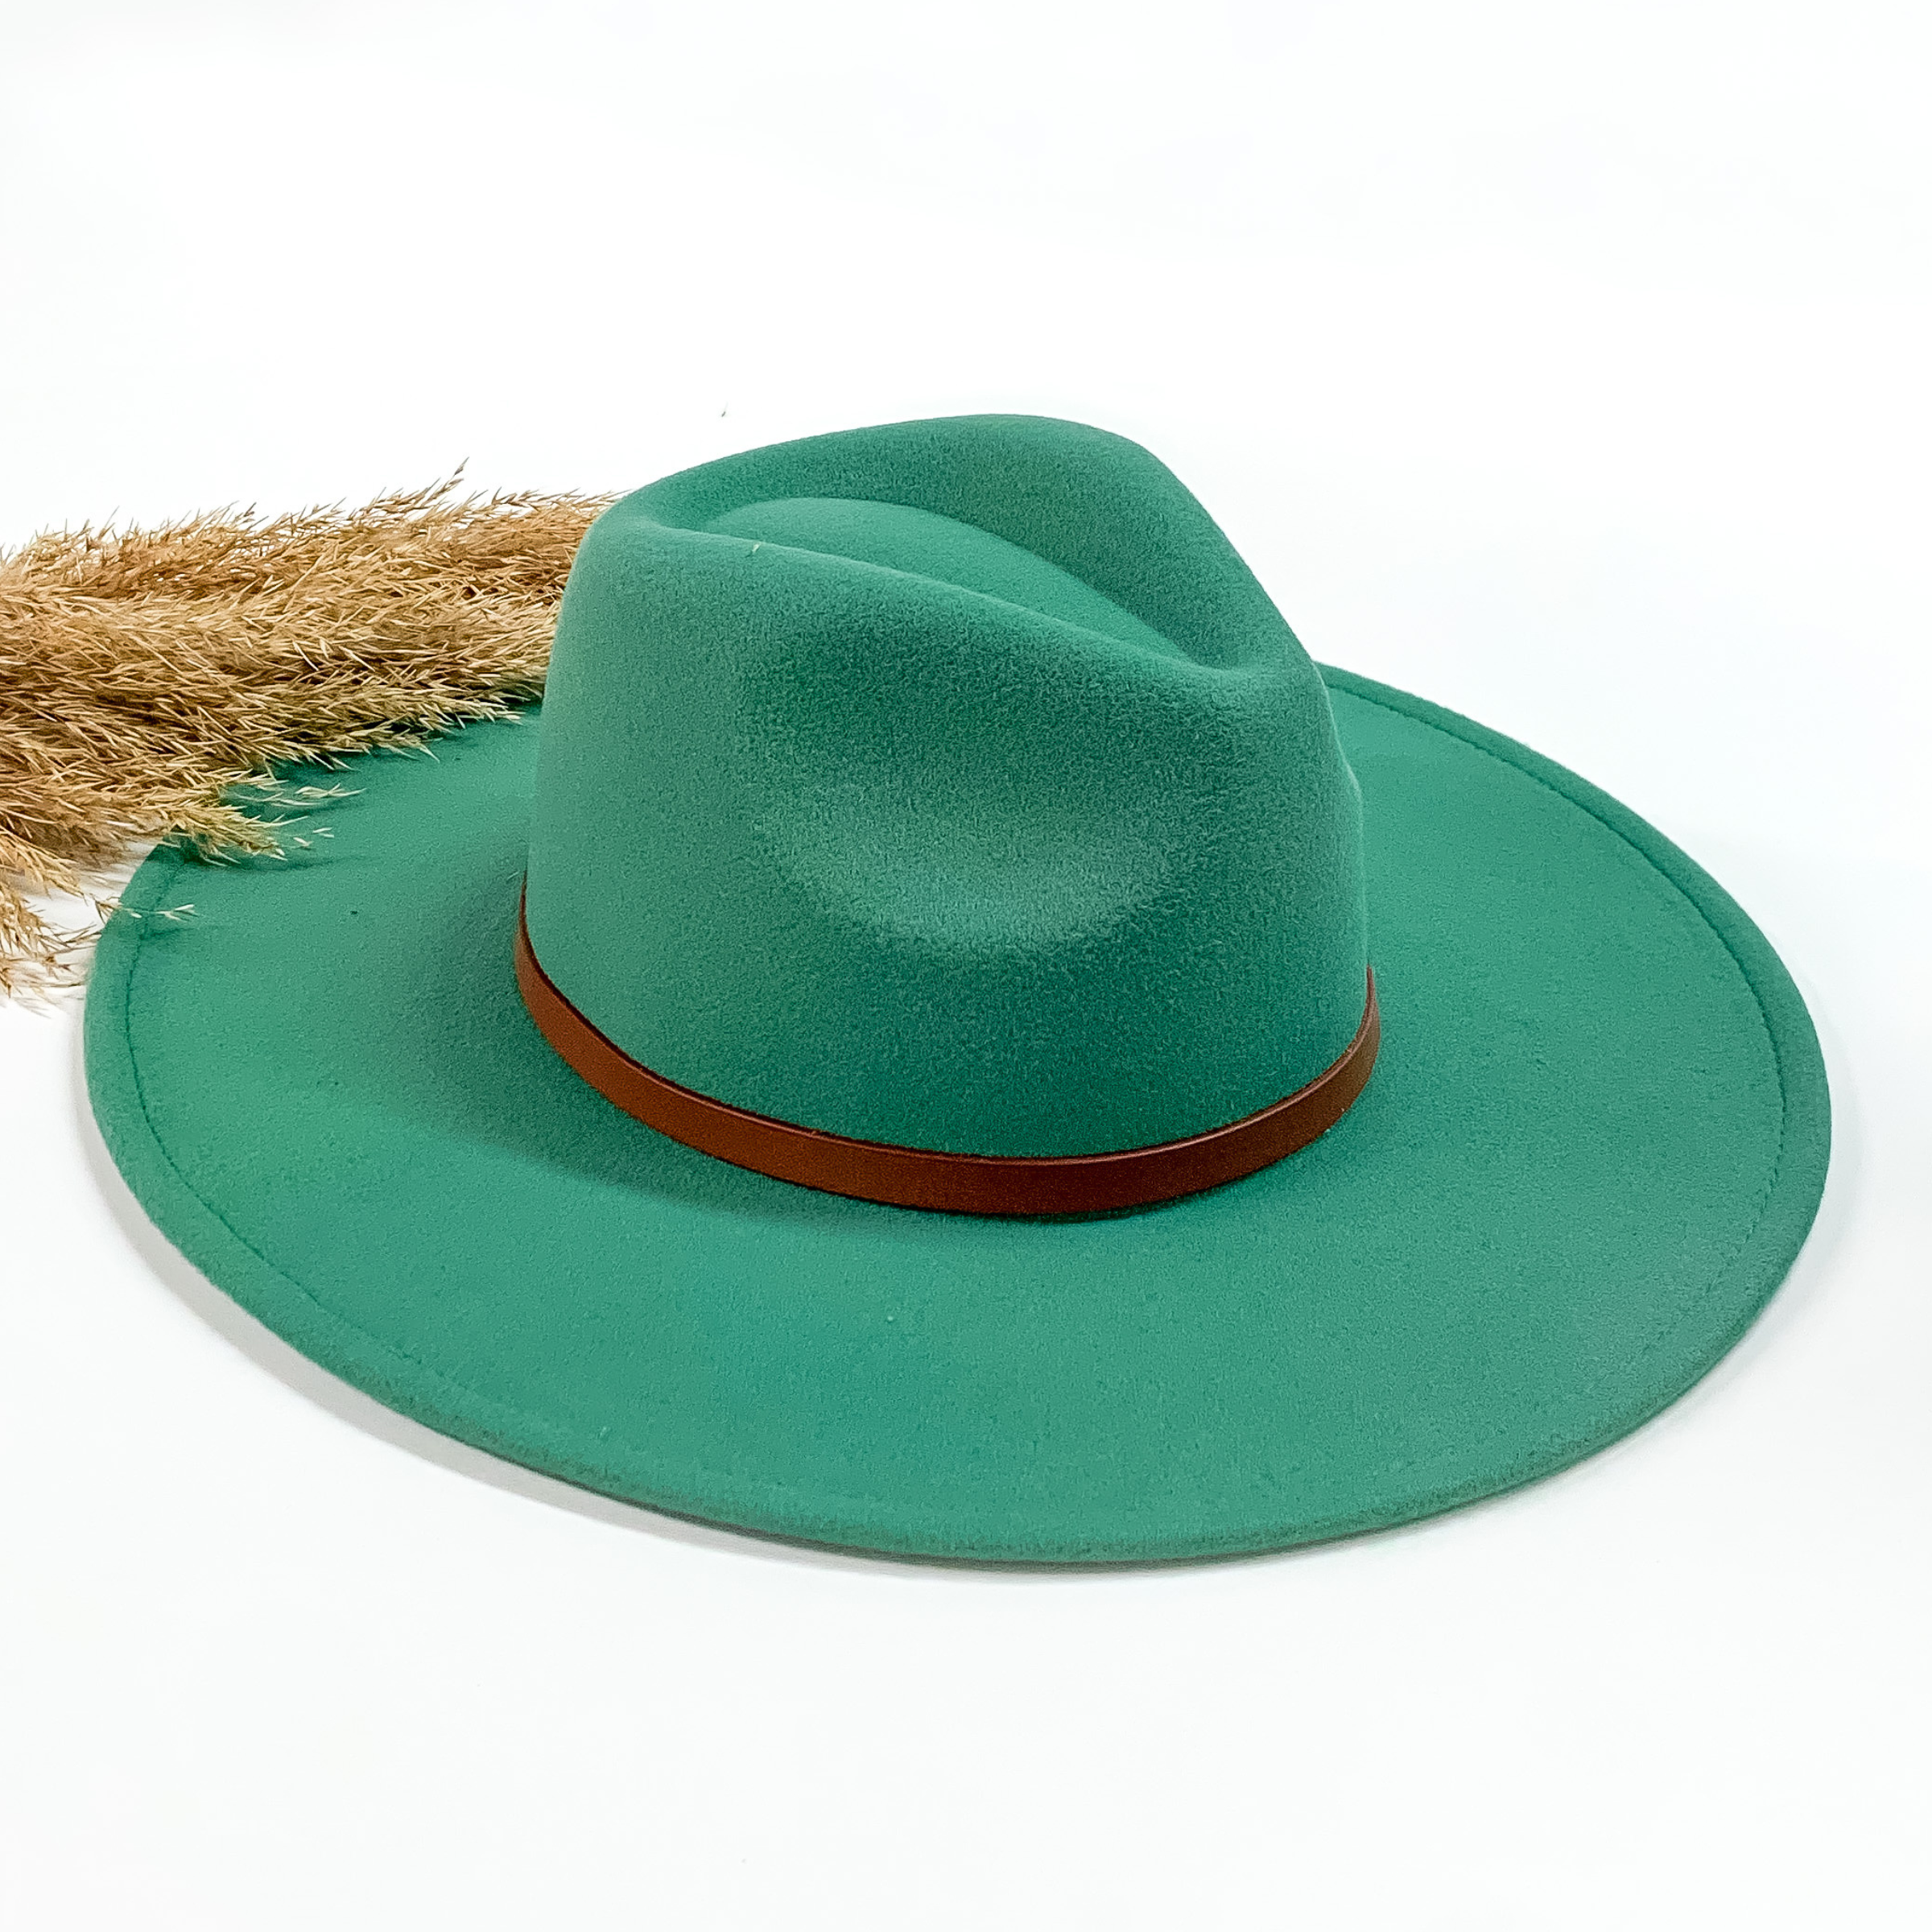 Turquoise faux felt hat with a thin brown hat band. This hat is pictured on a white background with tan pompous in the background.